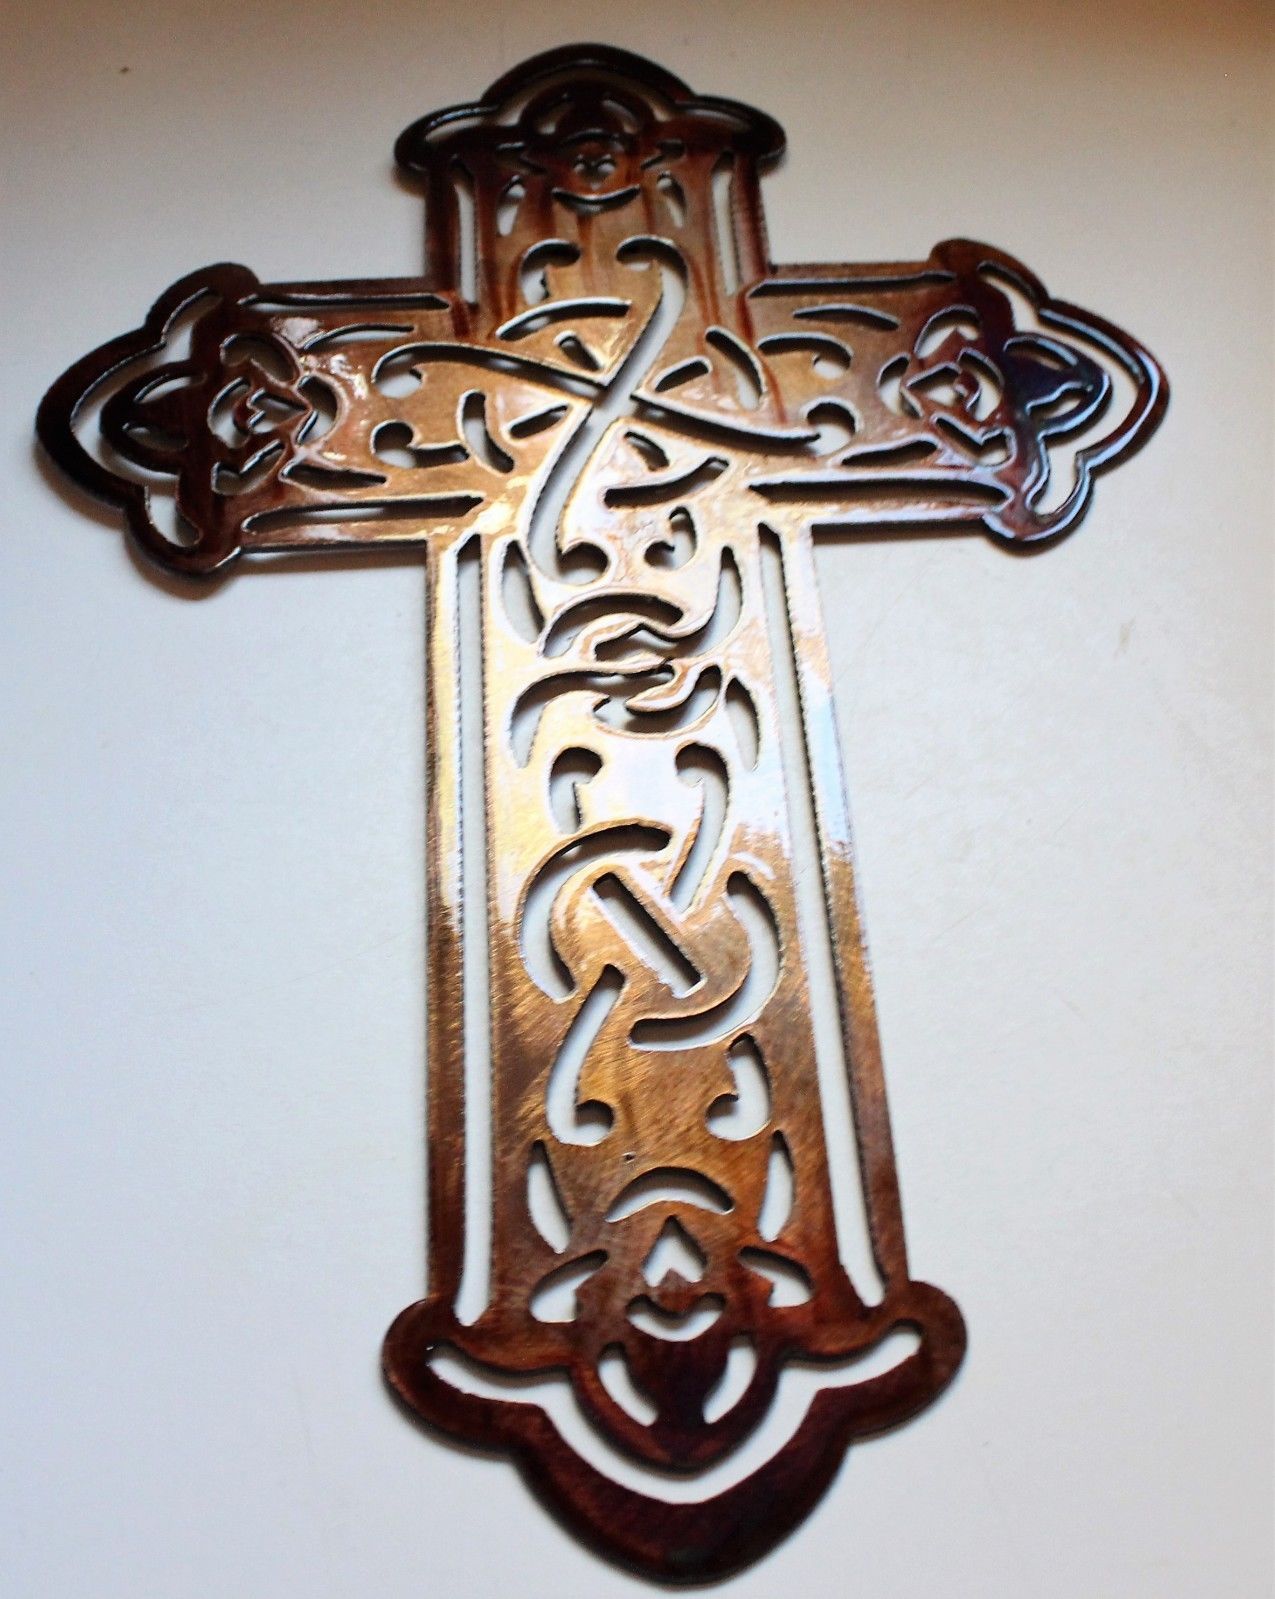 Primary image for Renaissance Styled Ornamental Cross 16" x 10 1/2" Metal Wall Art Decor